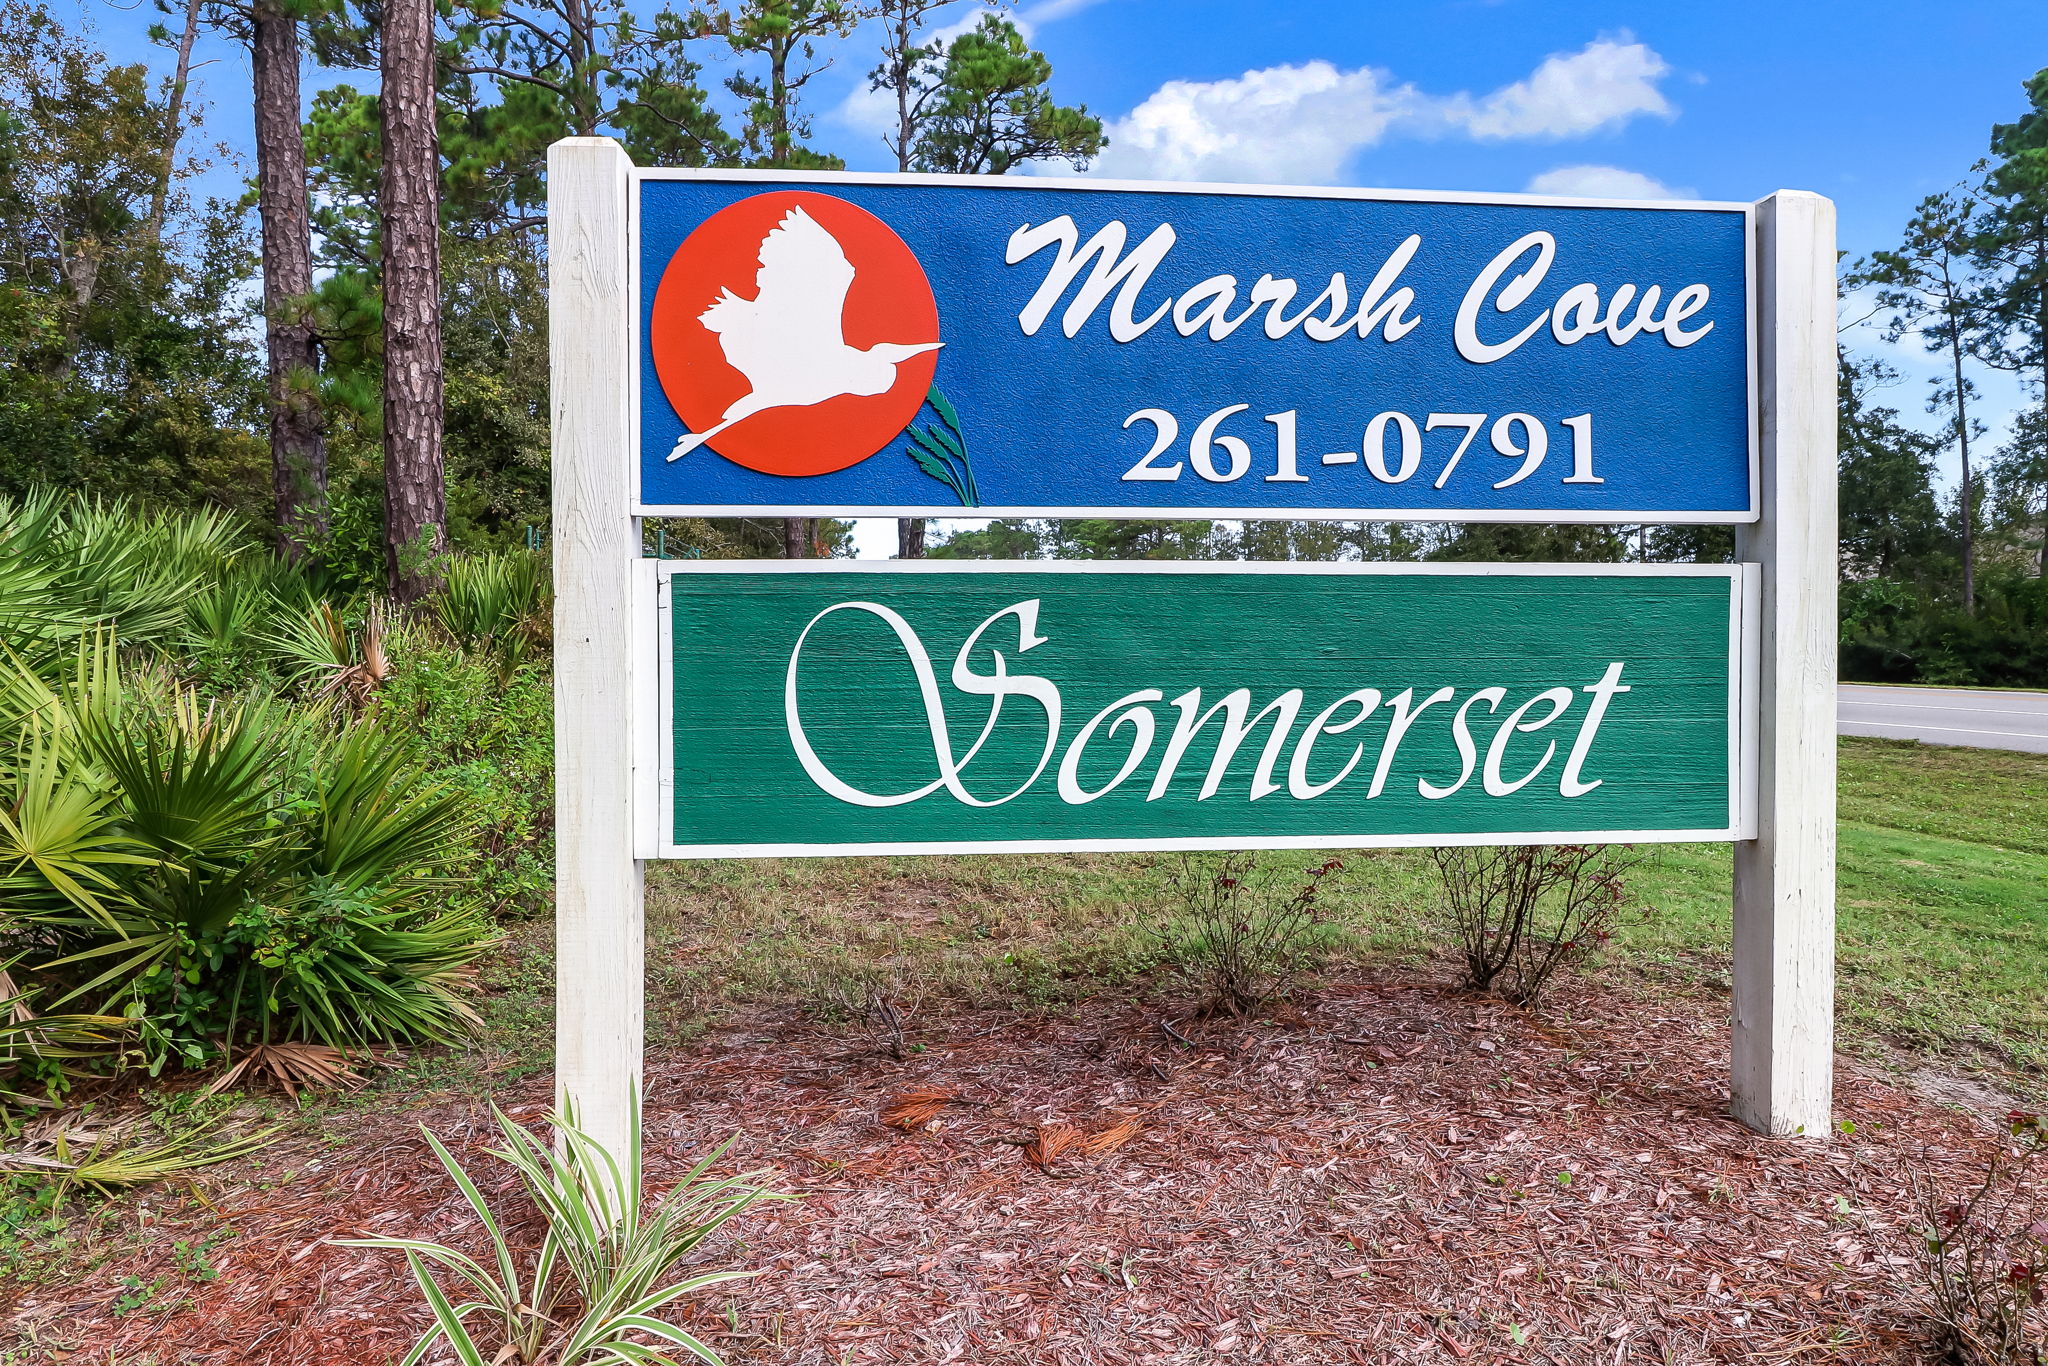 Marsh Cove is a boutique community nestled amidst marsh and lush landscape